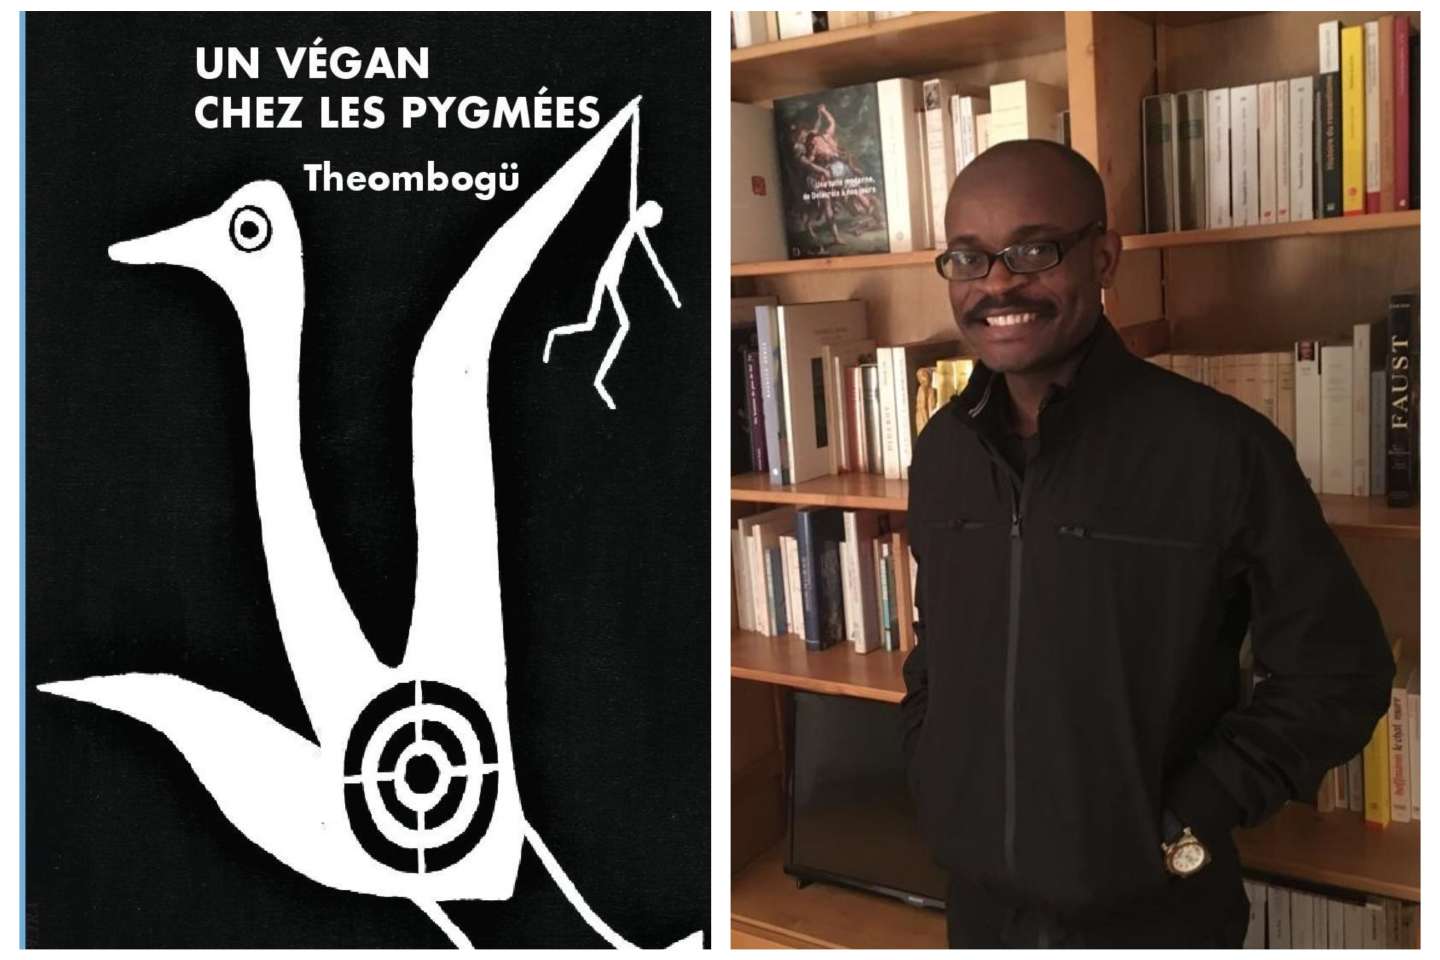 “A vegan among the Pygmies”, by Theombogü: under cover of humor, a plea for minorities